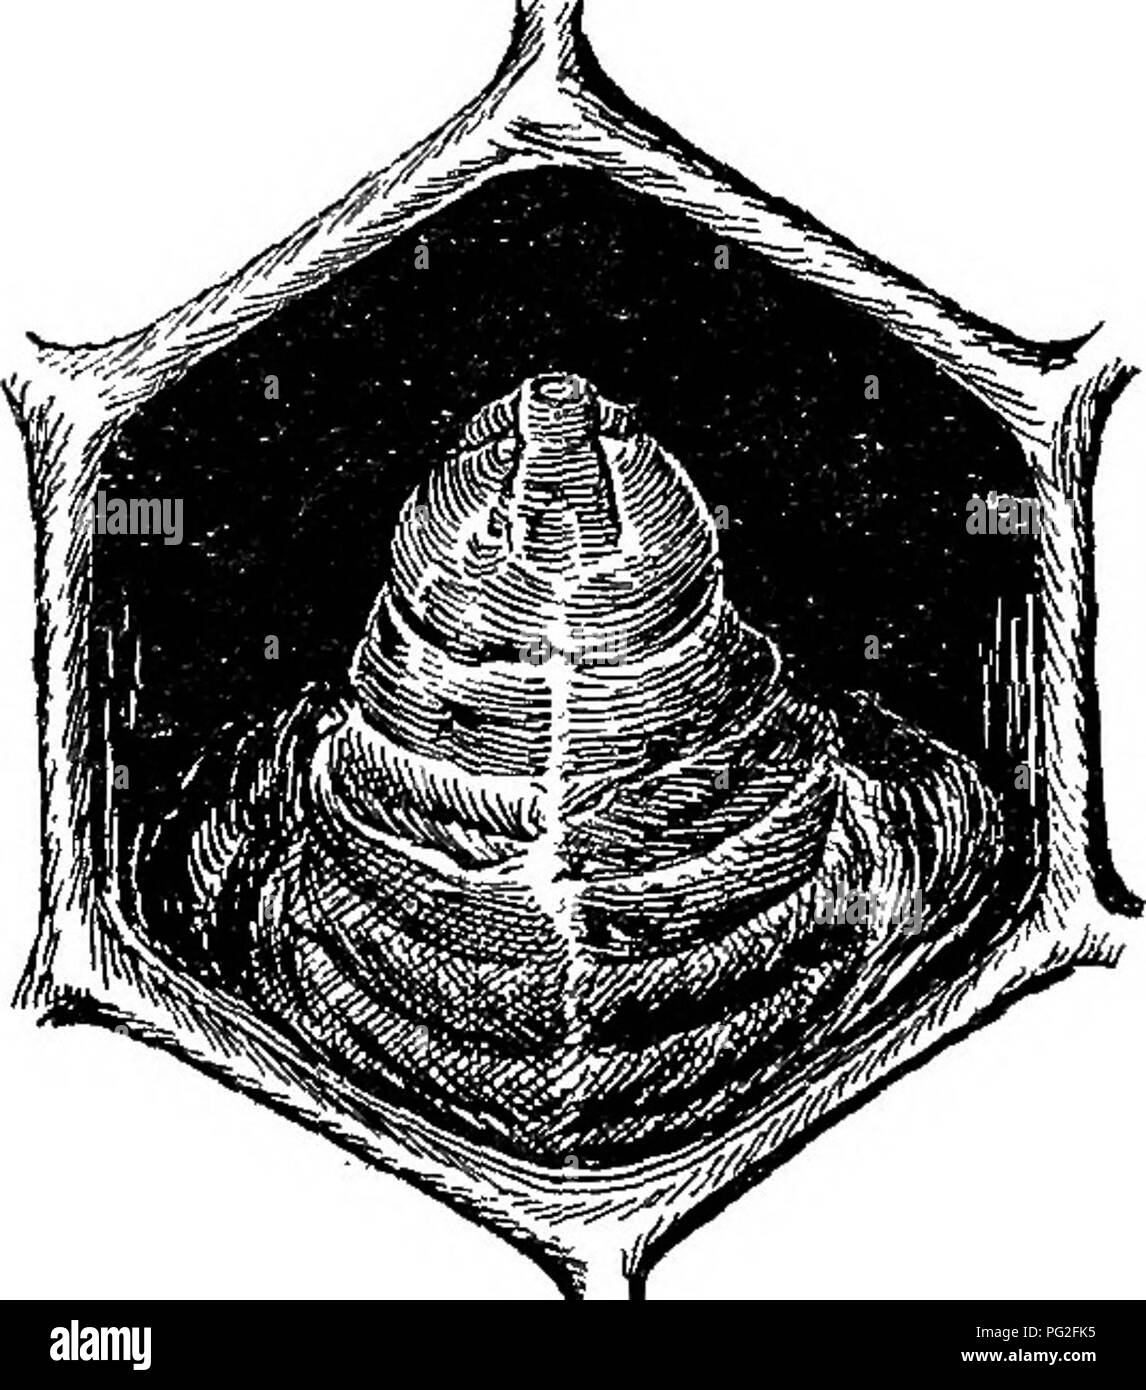 . Sacbrood. Bees. Fig. 8.—End view of capped cell whioh con- tains a larva dead of sacbrood, being simi- lar to the one shown in figure 9. The cap here is not different from a cap of the same age over a healthy larva. (Original.) stage is reached. It is rare to find a pupa dead of sacbrood (PL II, zz). The larvae that die (fig. 7) are found lying extended lengthwise with the dorsal side on the floor of the cell. They may be found in capped (fig. 8) cells or in cells which have been tmcapped (fig. 9), as bees often remove the caps from cells containing dead larvae. Caps that are not removed are Stock Photo